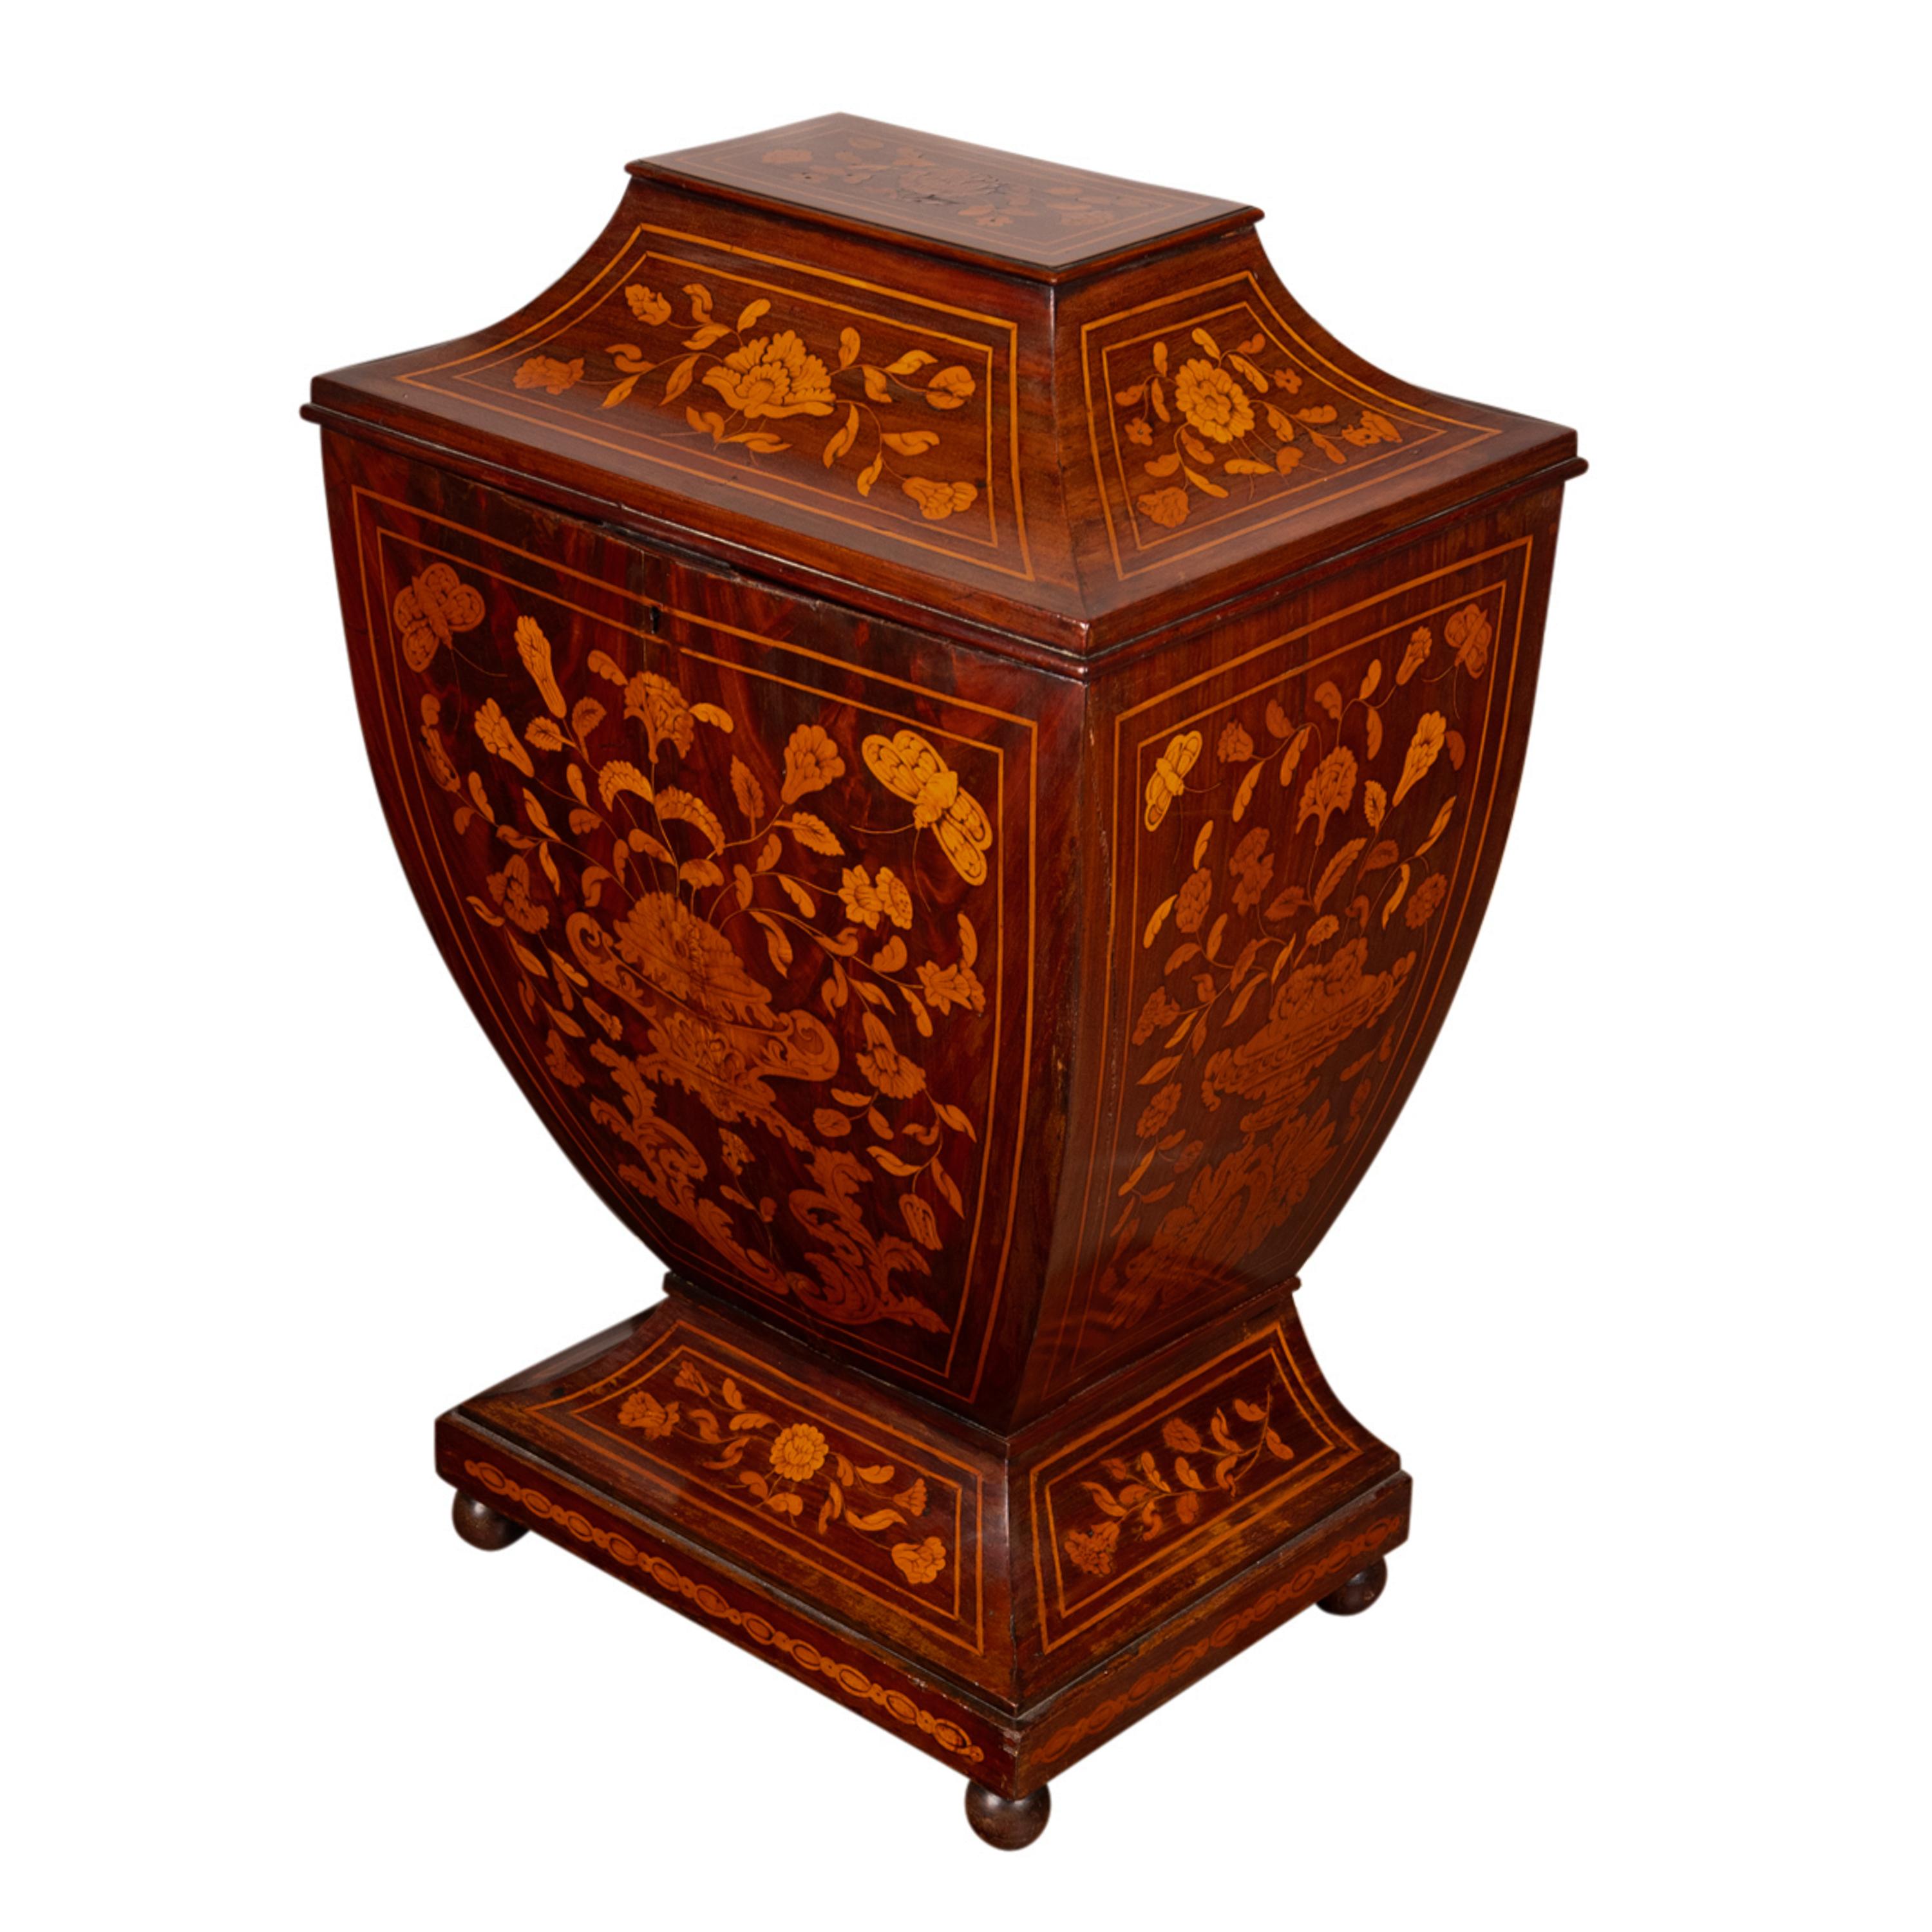 Antique 18th Century Dutch Marquetry Bombe Shaped Wine Cellerette Cooler 1760 For Sale 5